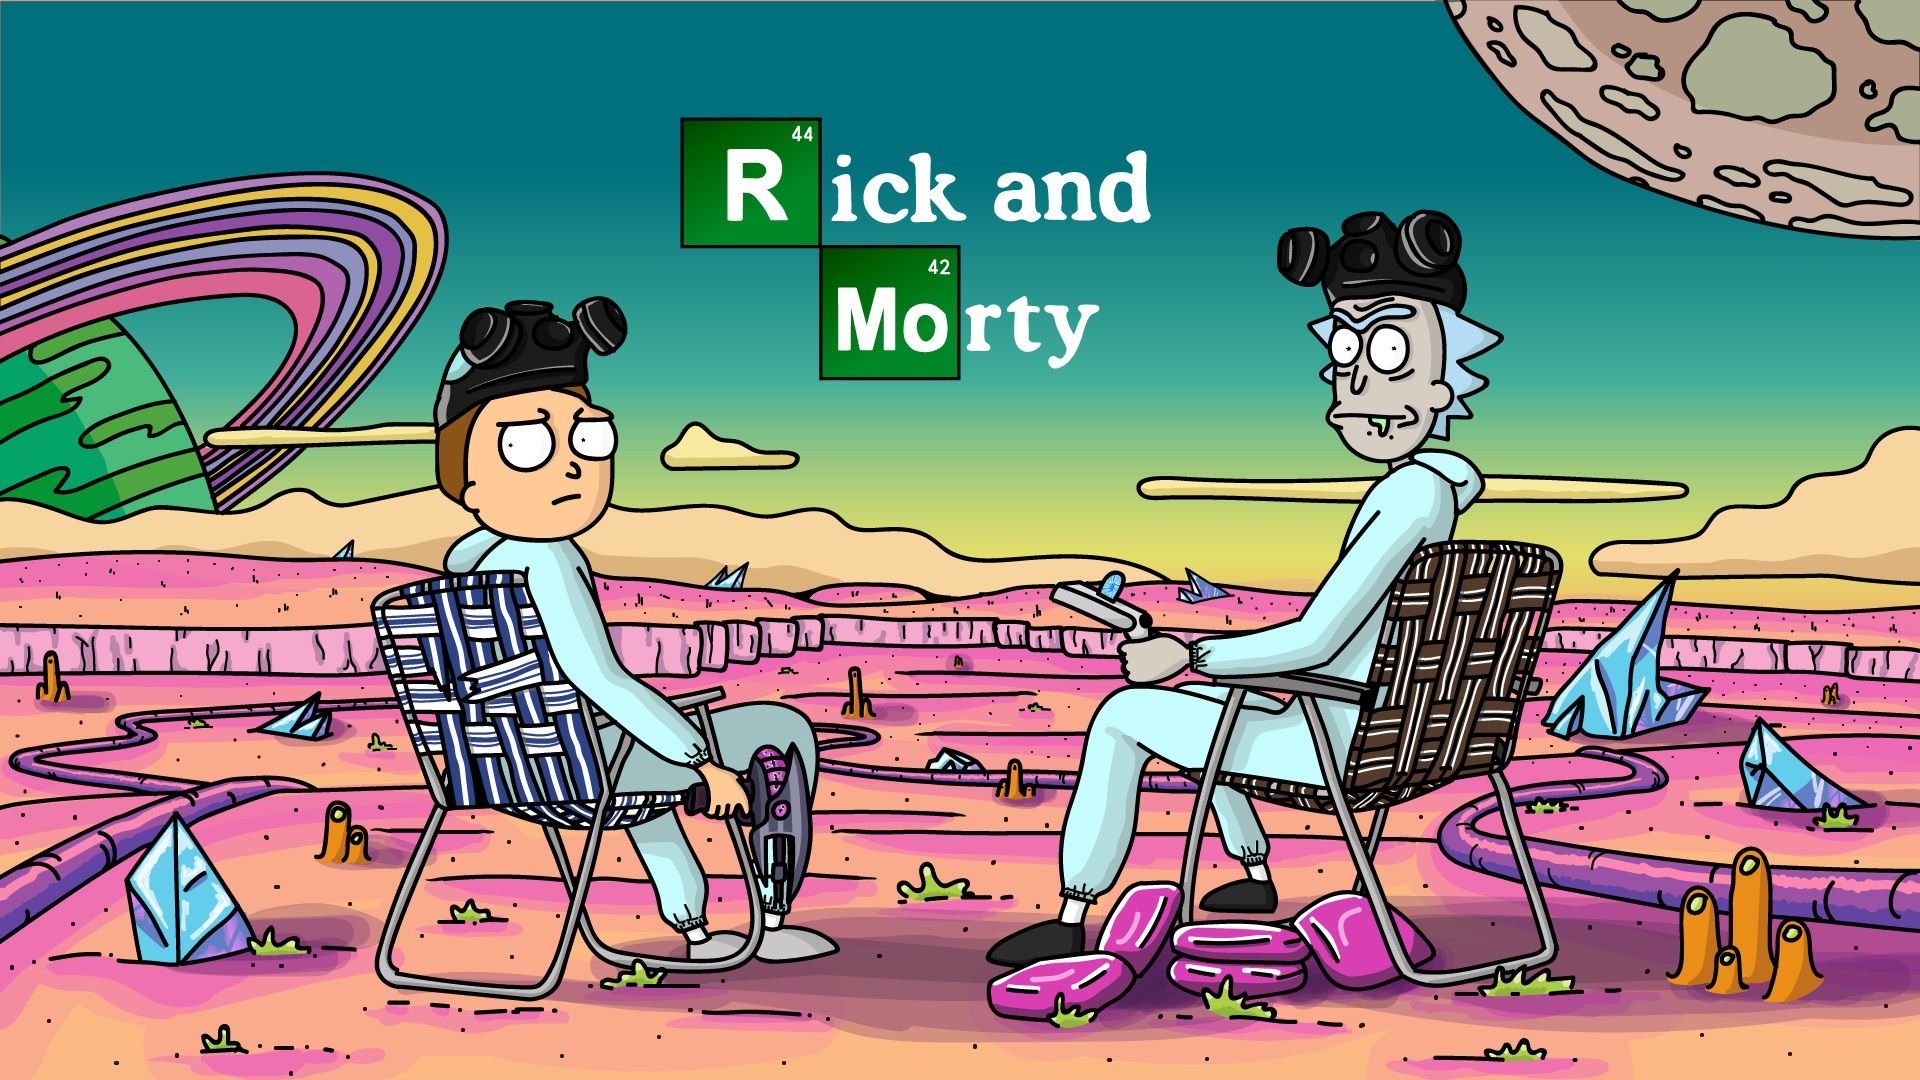 April's Fool Prank or Real Release of Rick and Morty Episode